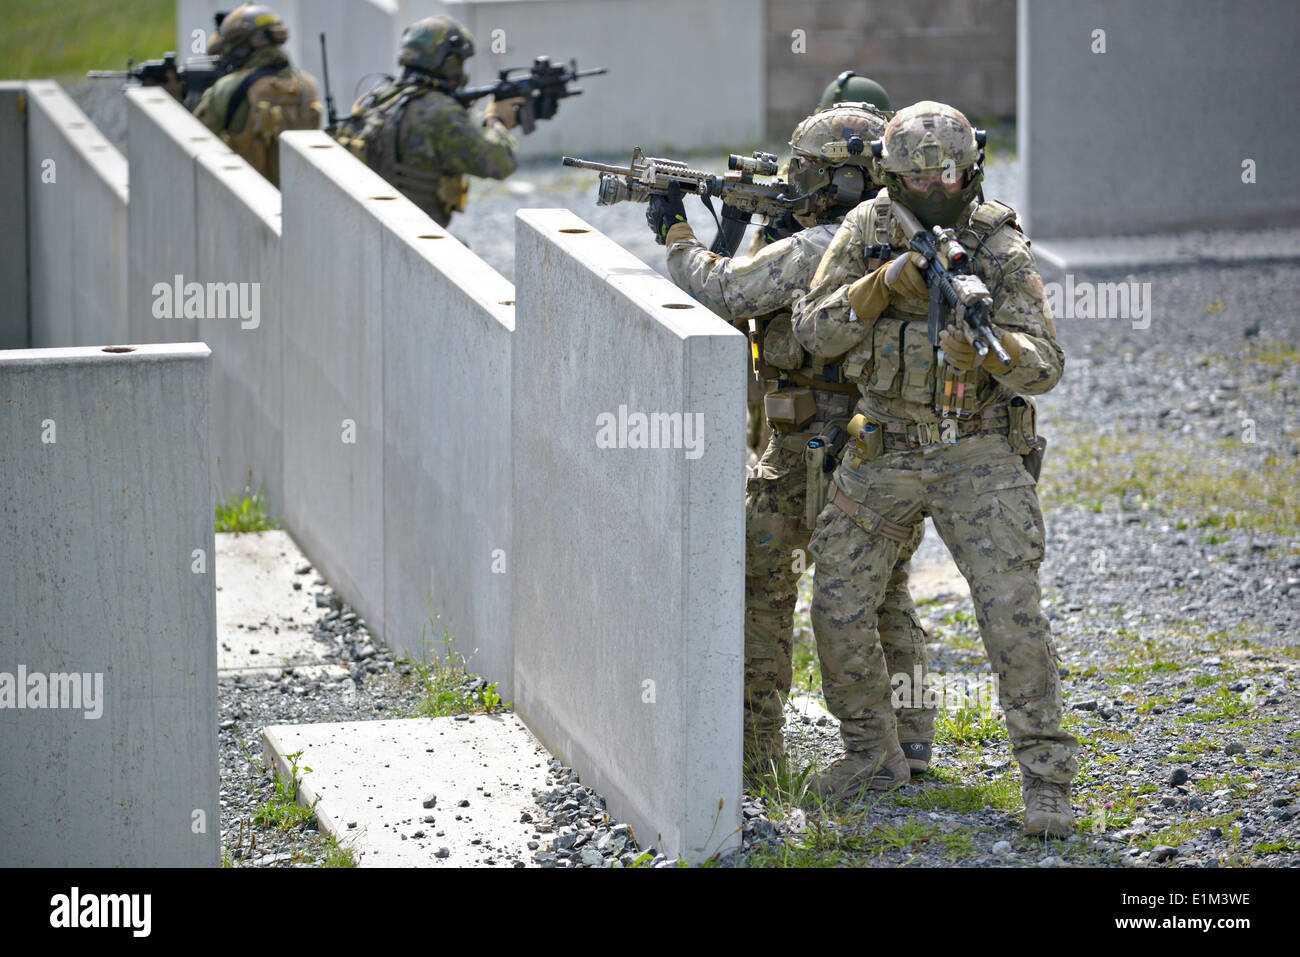 Special operation forces from nine different nations participate in the International Special Training Center advanced close quarter battle course at the 7th Army Joint Multinational Training Command June 5, 2014 at Grafenwoehr Training Area, Germany. Stock Photo